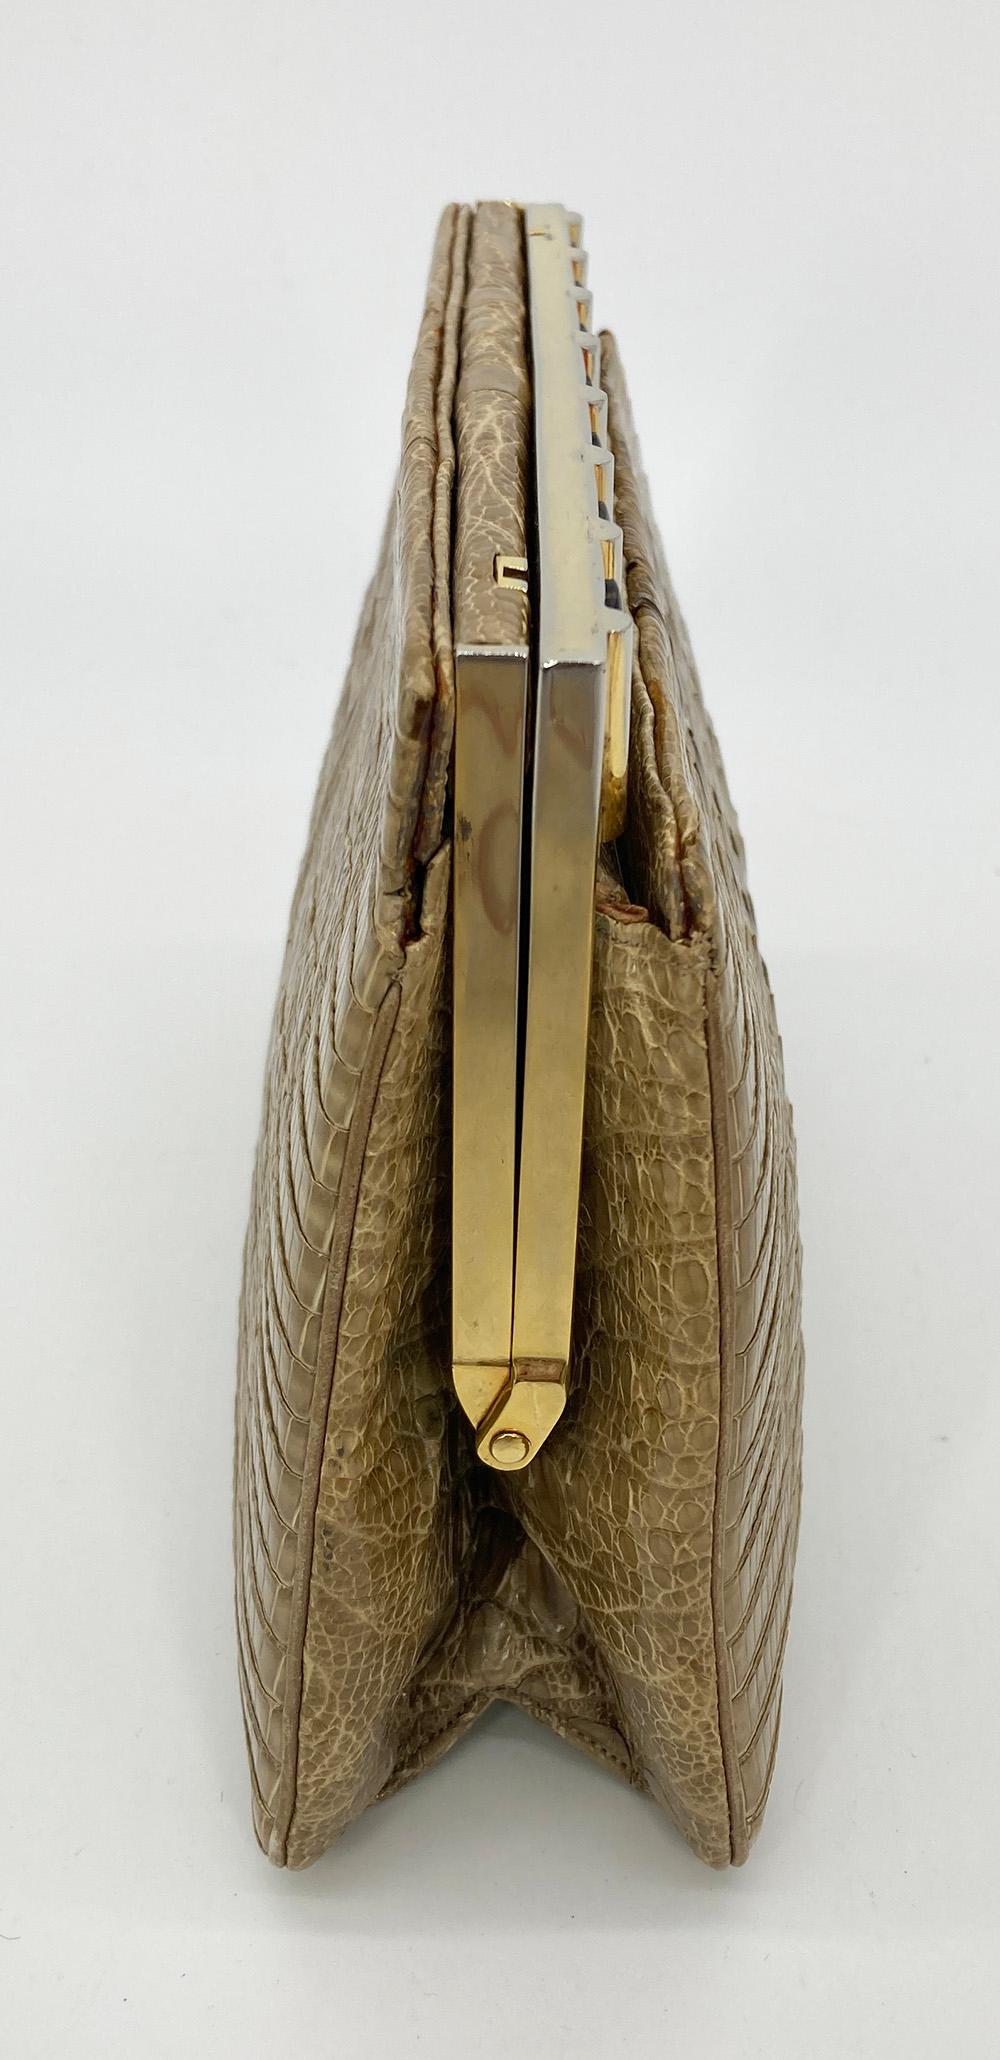 Judith Leiber Natural Tan Hornback Alligator Clutch in good condition. Natural light tan hornback alligator exterior trimmed with silver and gold hardware. Top side pull lever closure opens to a tan satin interior with one slit and one zipped side